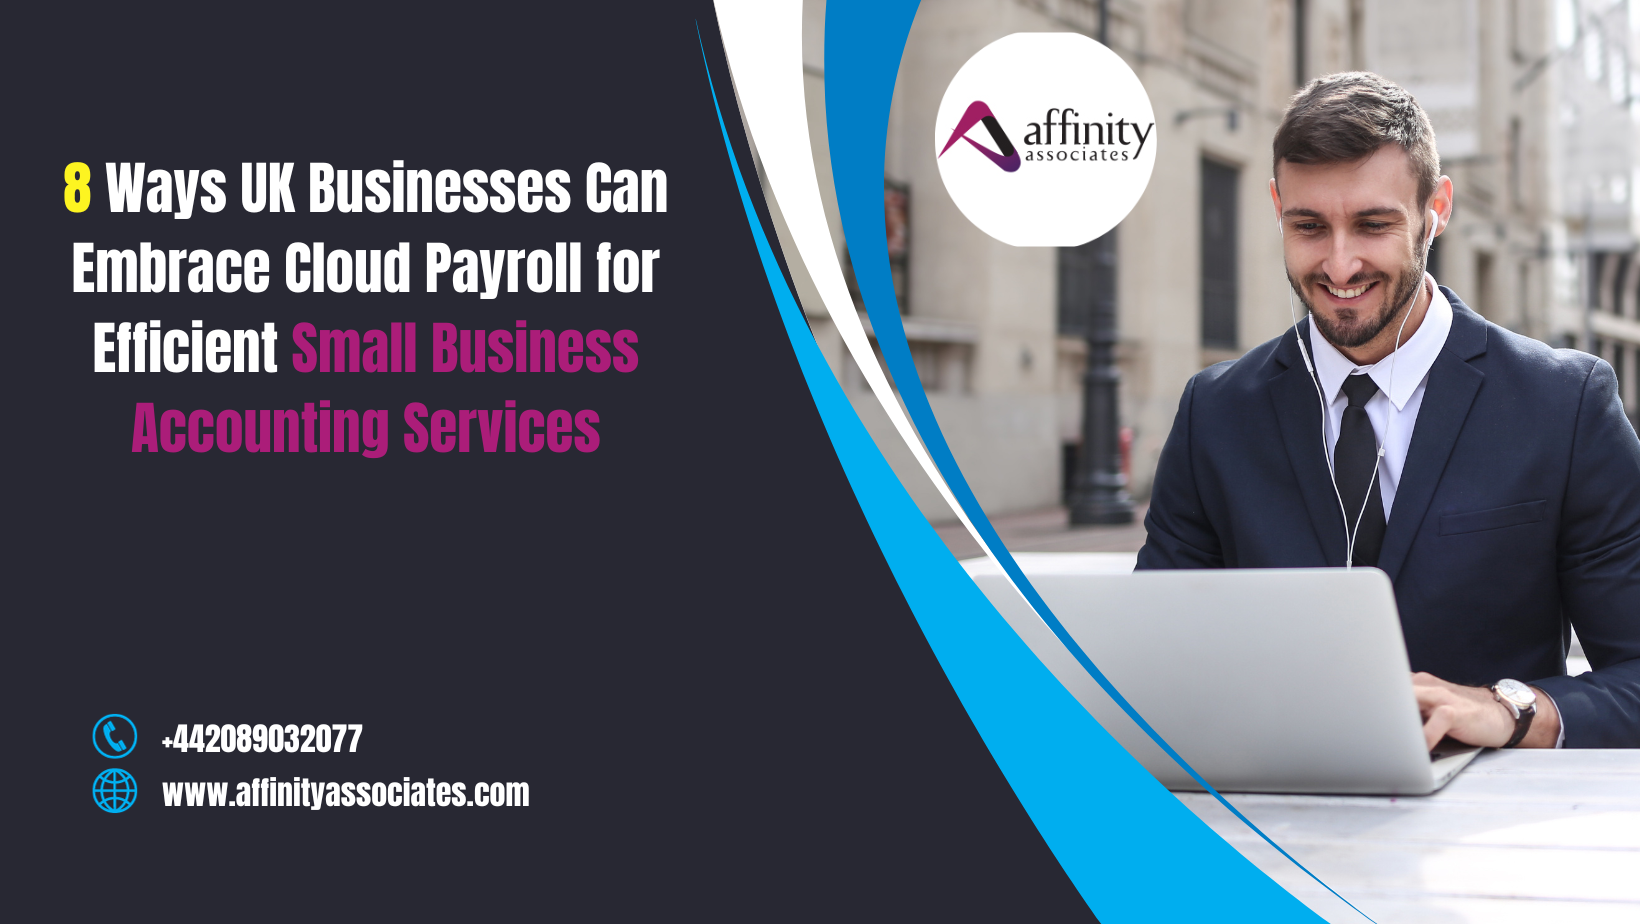 8 Ways UK Businesses Can Embrace Cloud Payroll for Efficient Small Business Accounting Services